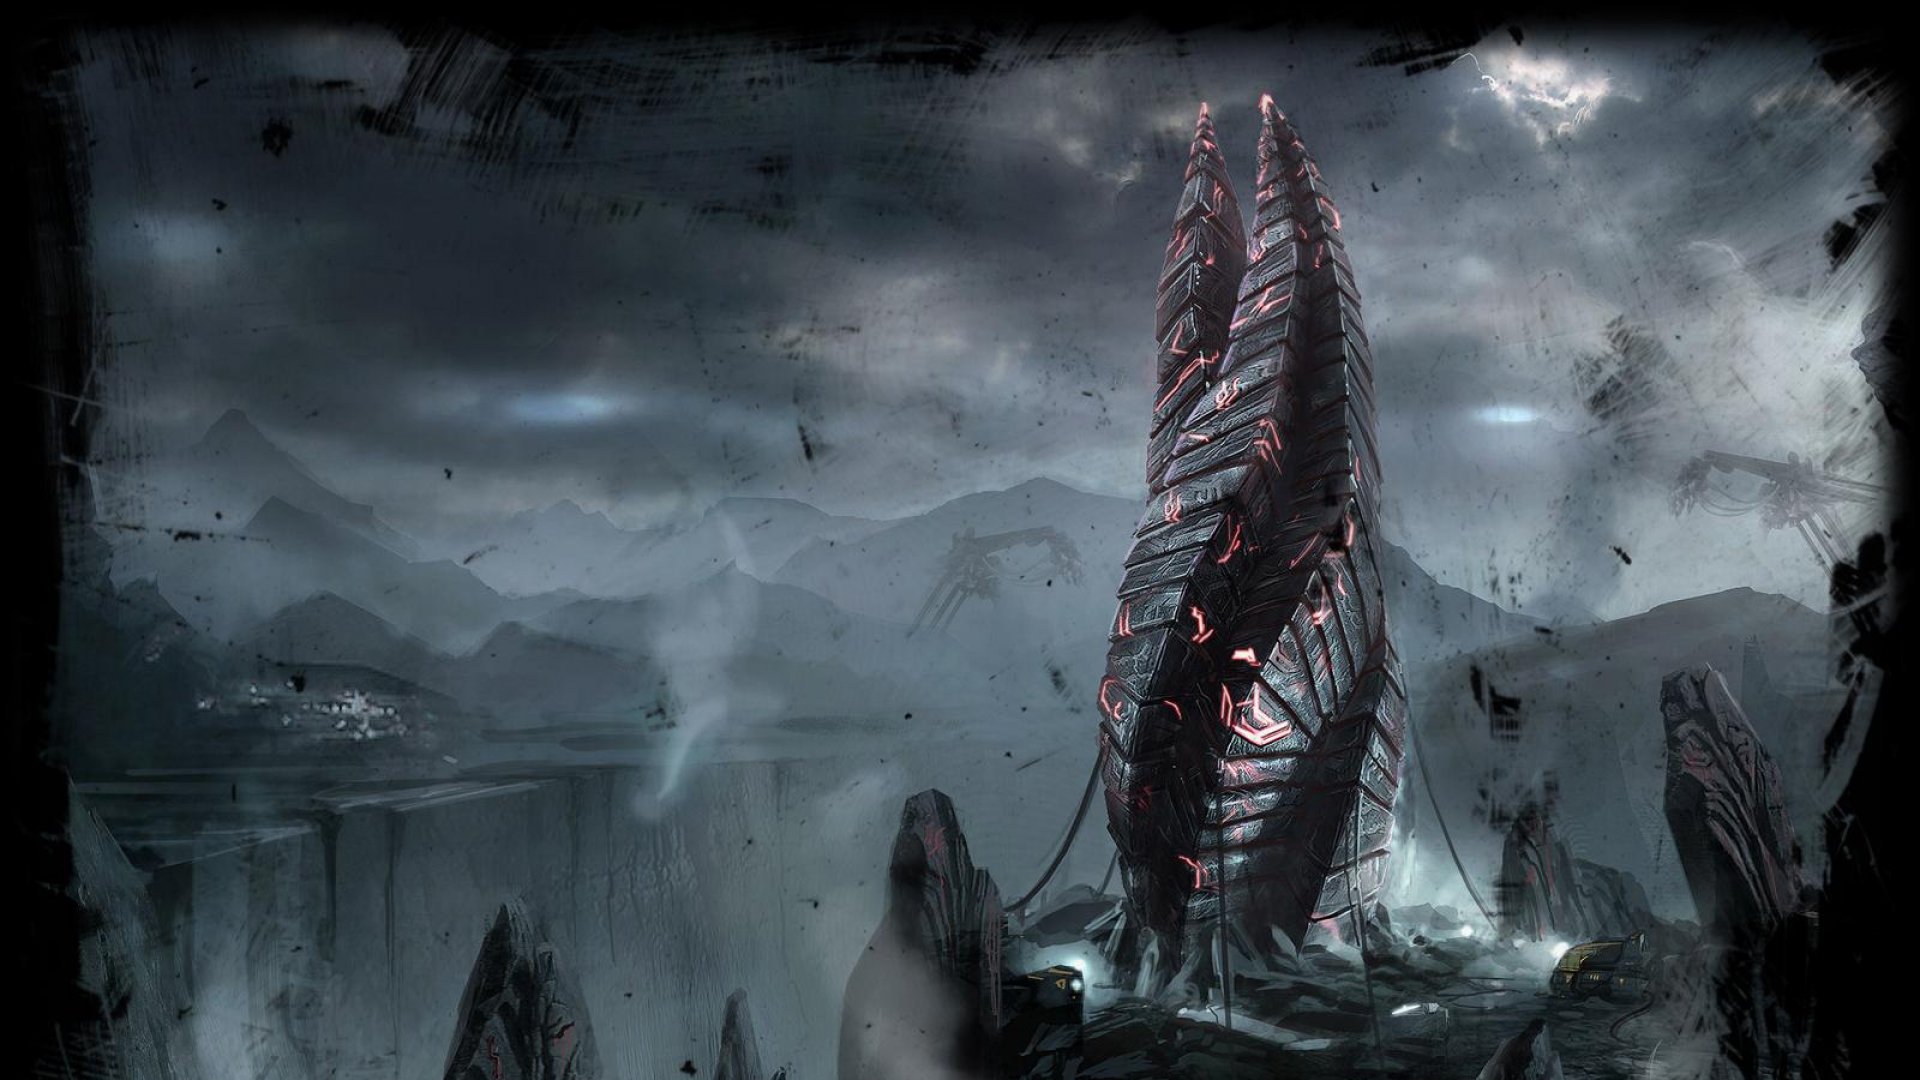 Dead Space Full HD Wallpaper and Background Image | 1920x1080 | ID:311571